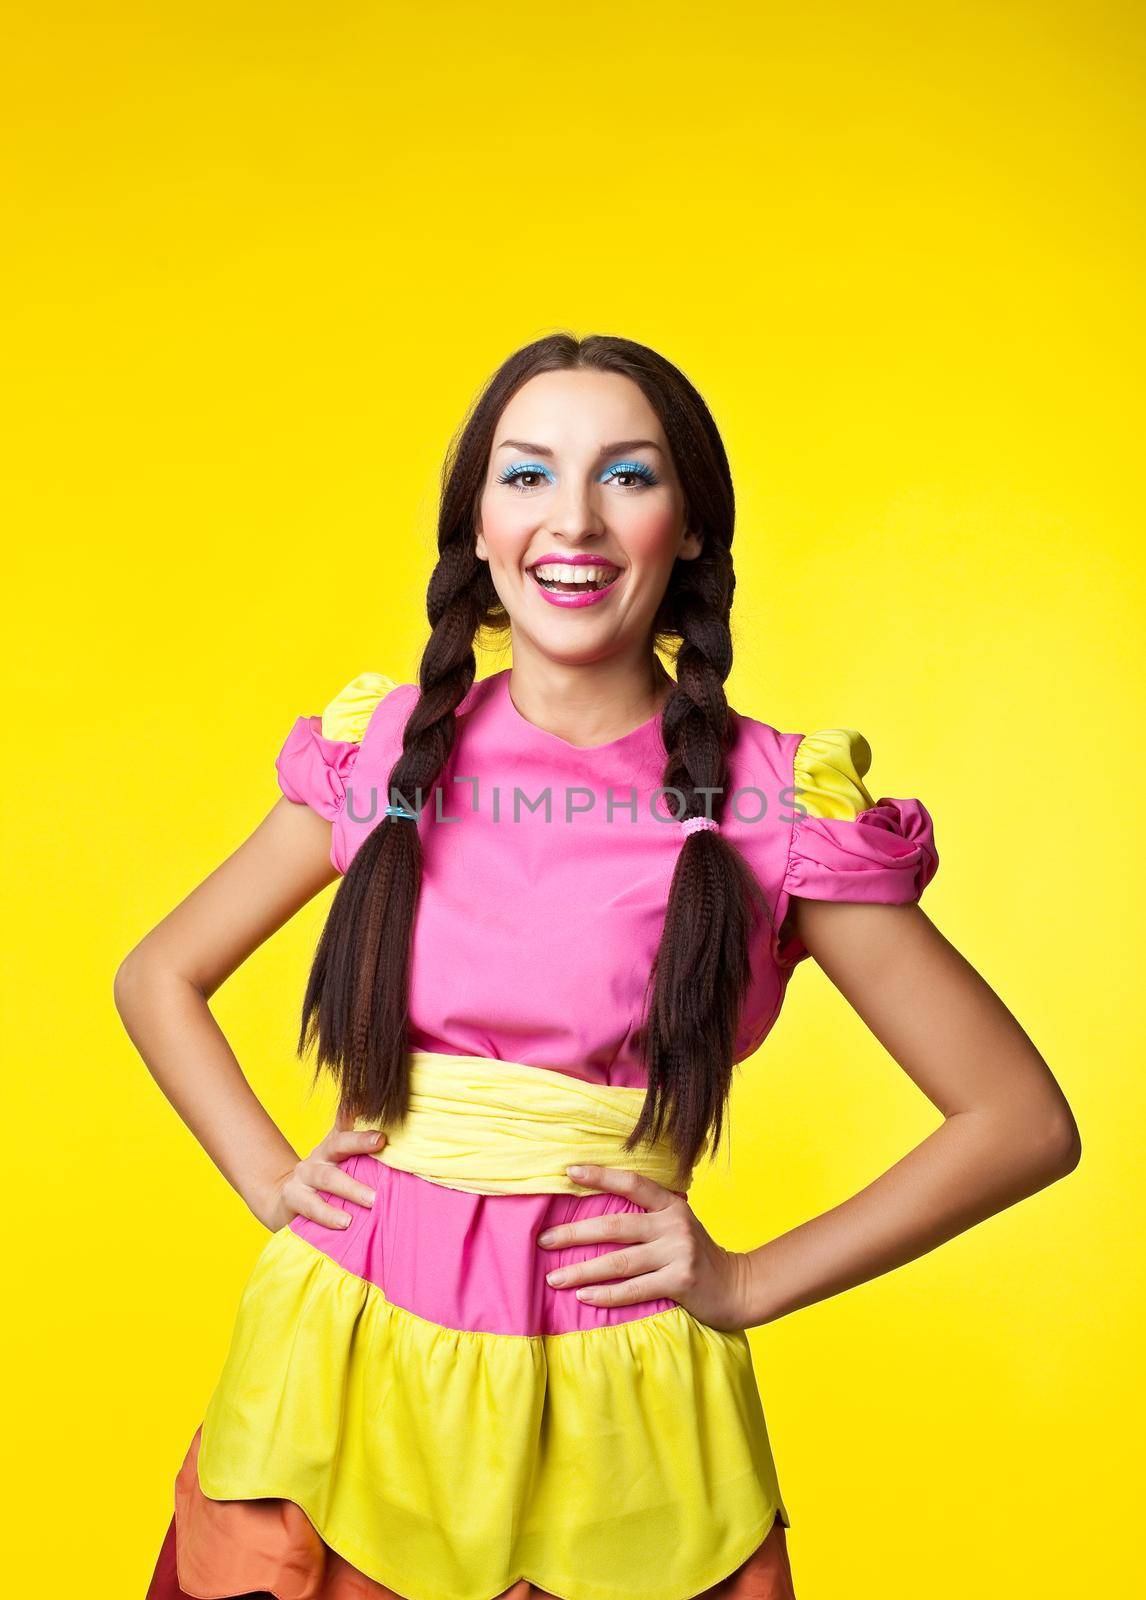 Young girl in doll costume smile on yellow by rivertime